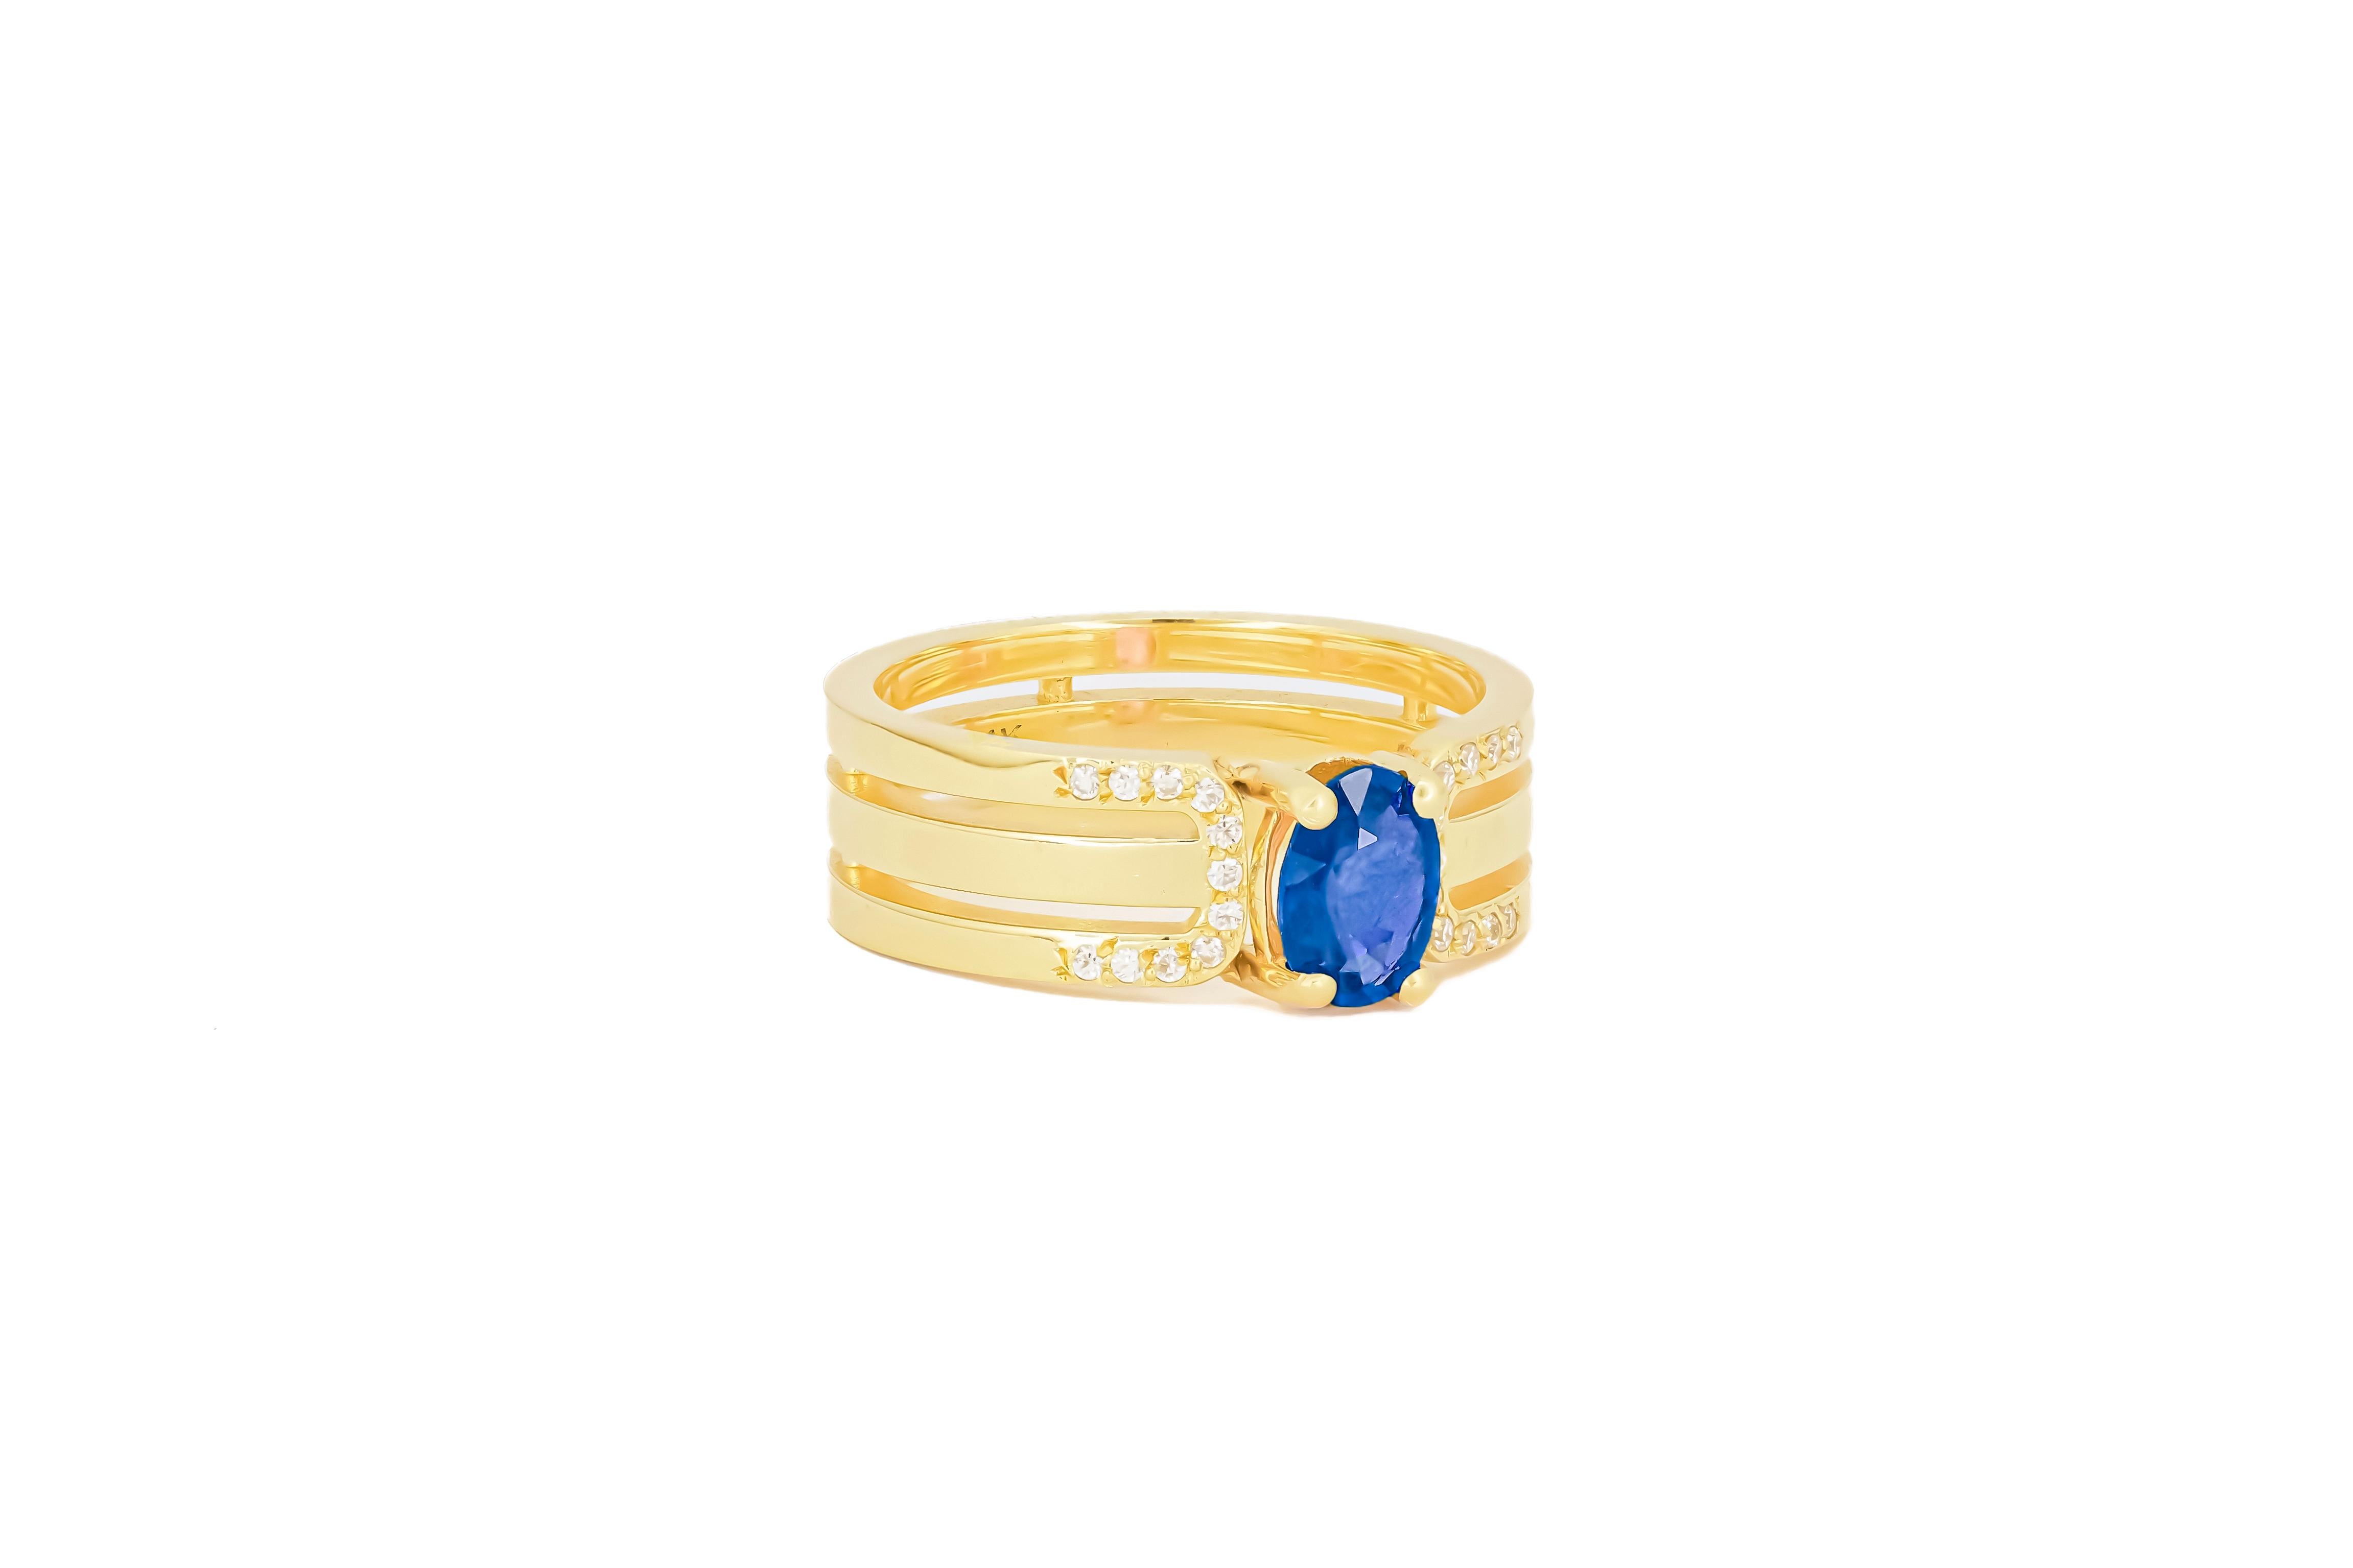 Modern 14 K Gold Mens Ring with Sapphire.  For Sale